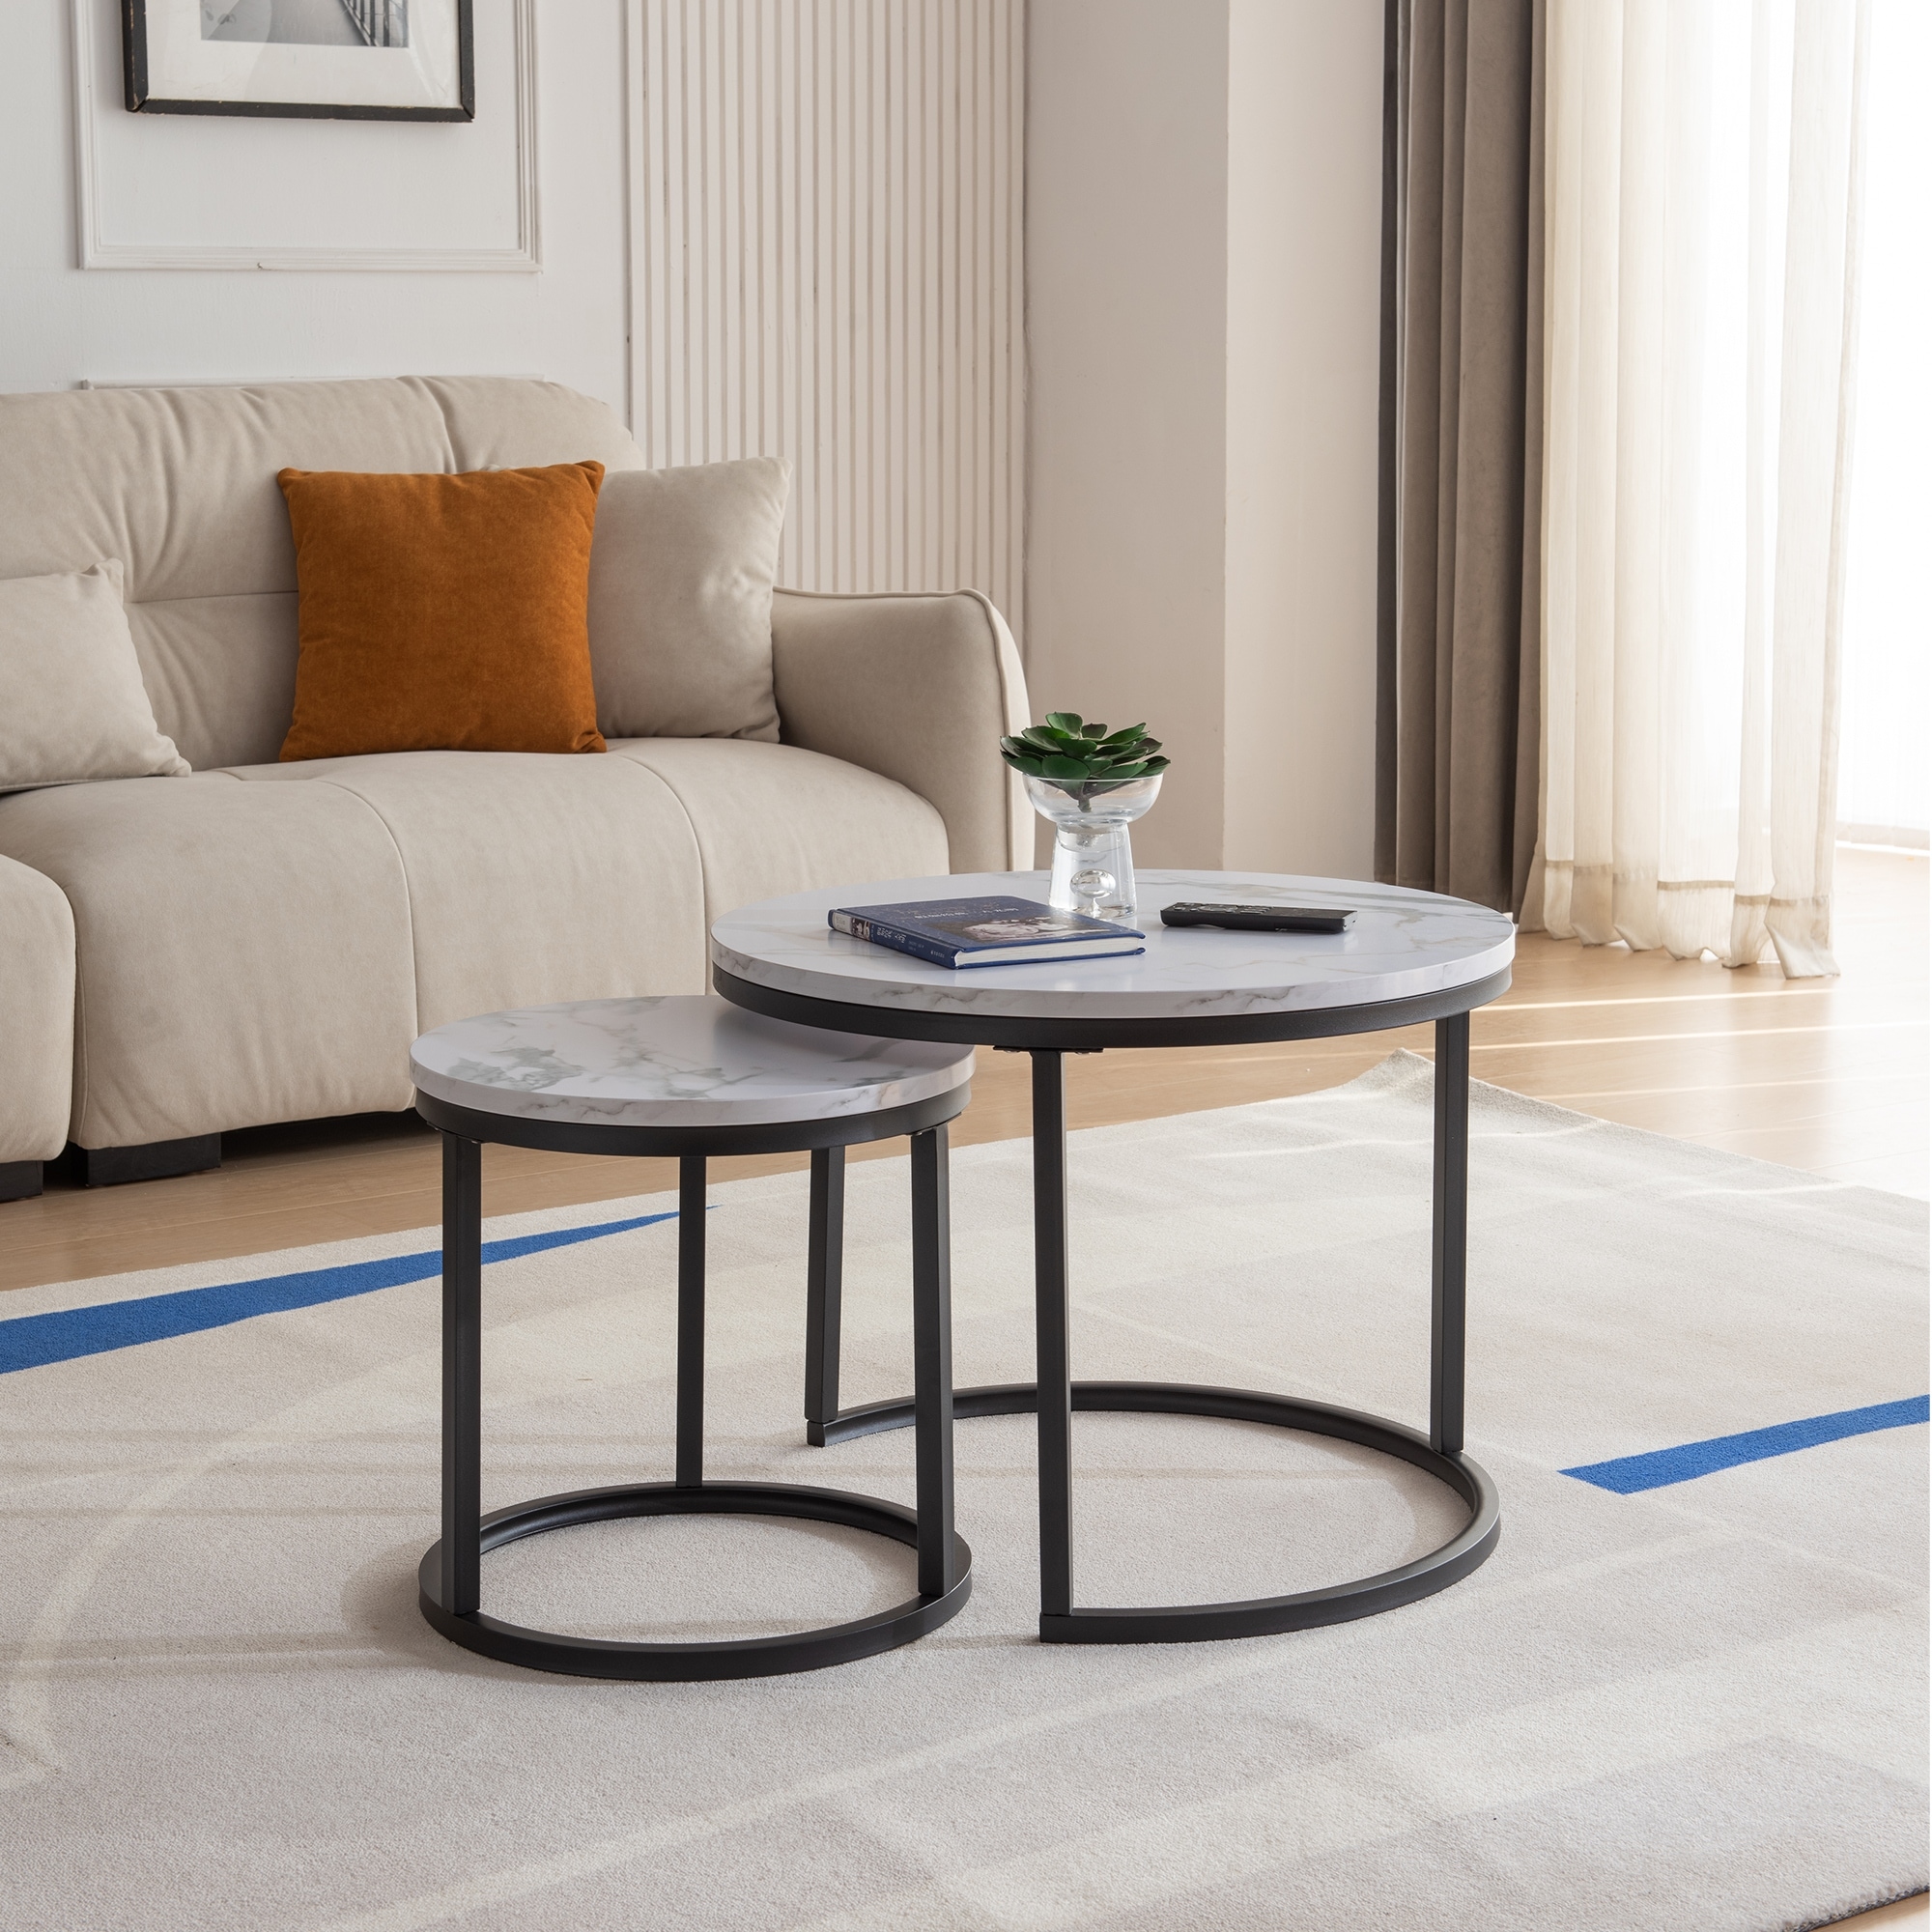 BESTCOSTY Modern Nesting coffee table,metal frame with marble color top-23.6 inch